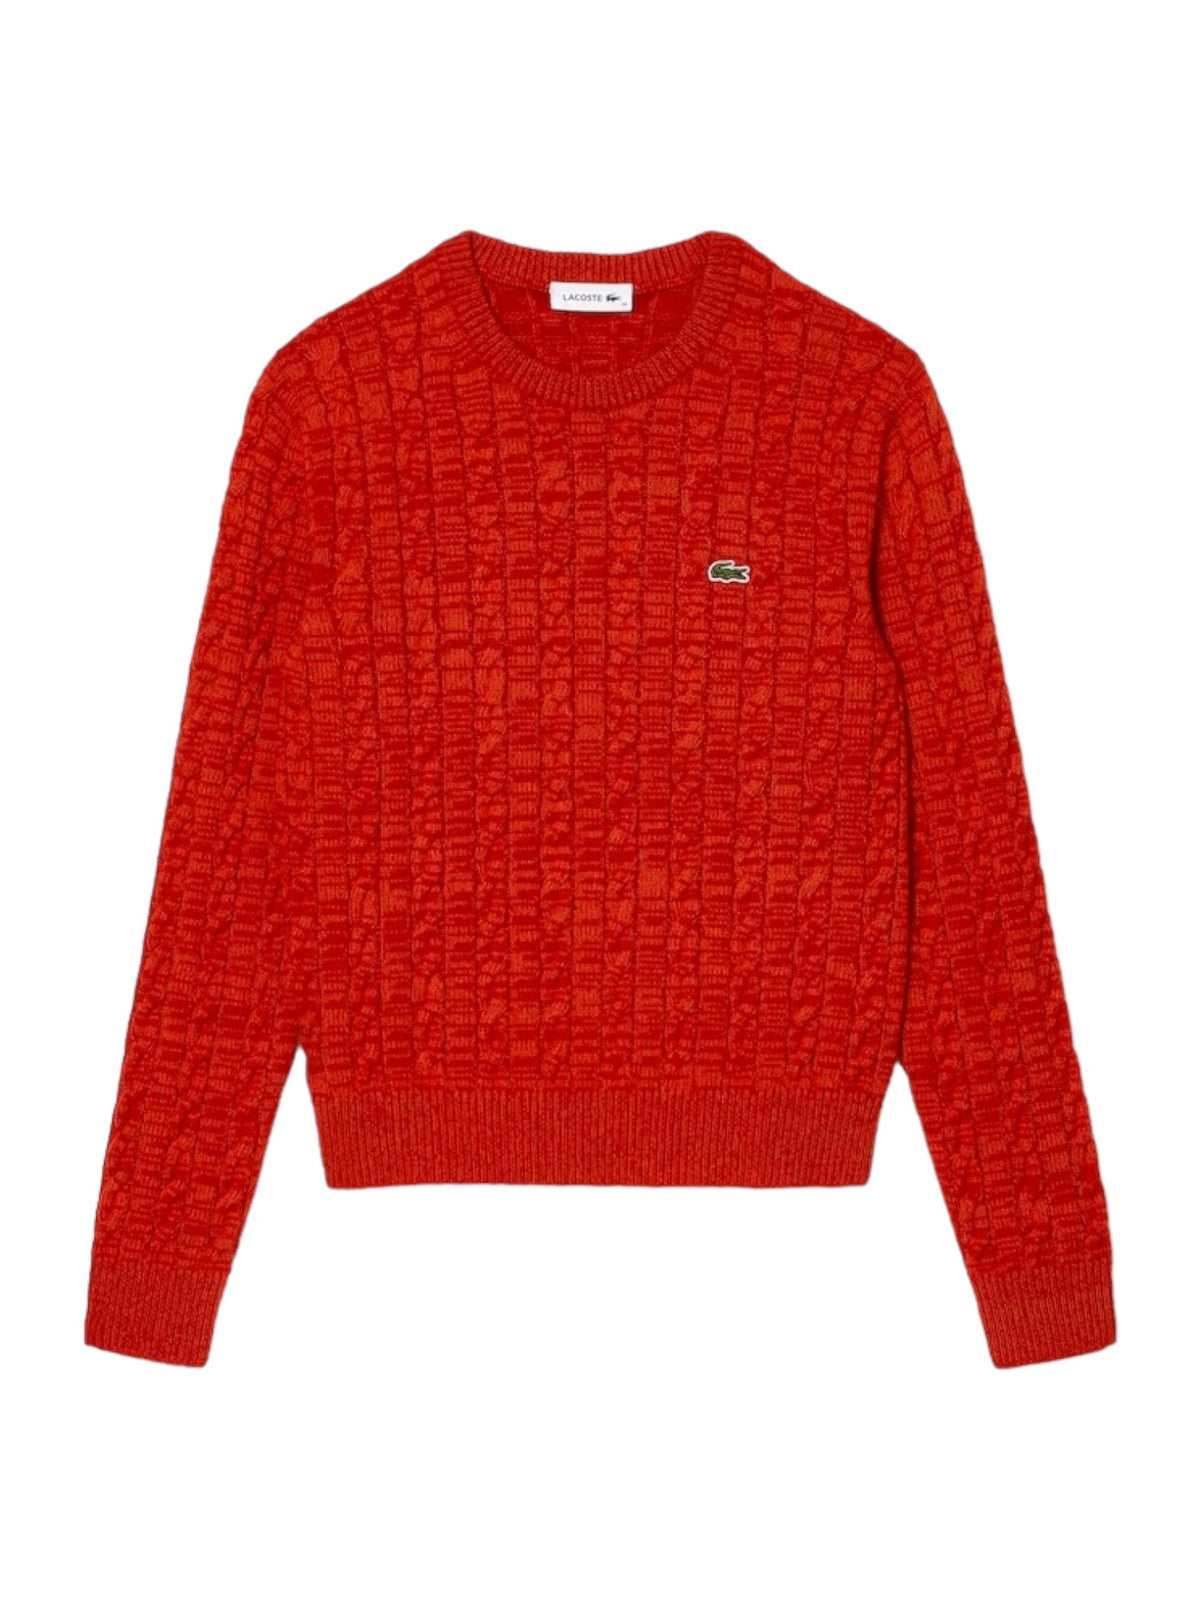 LACOSTE Maglione Donna  AF0633 QIF Rosso